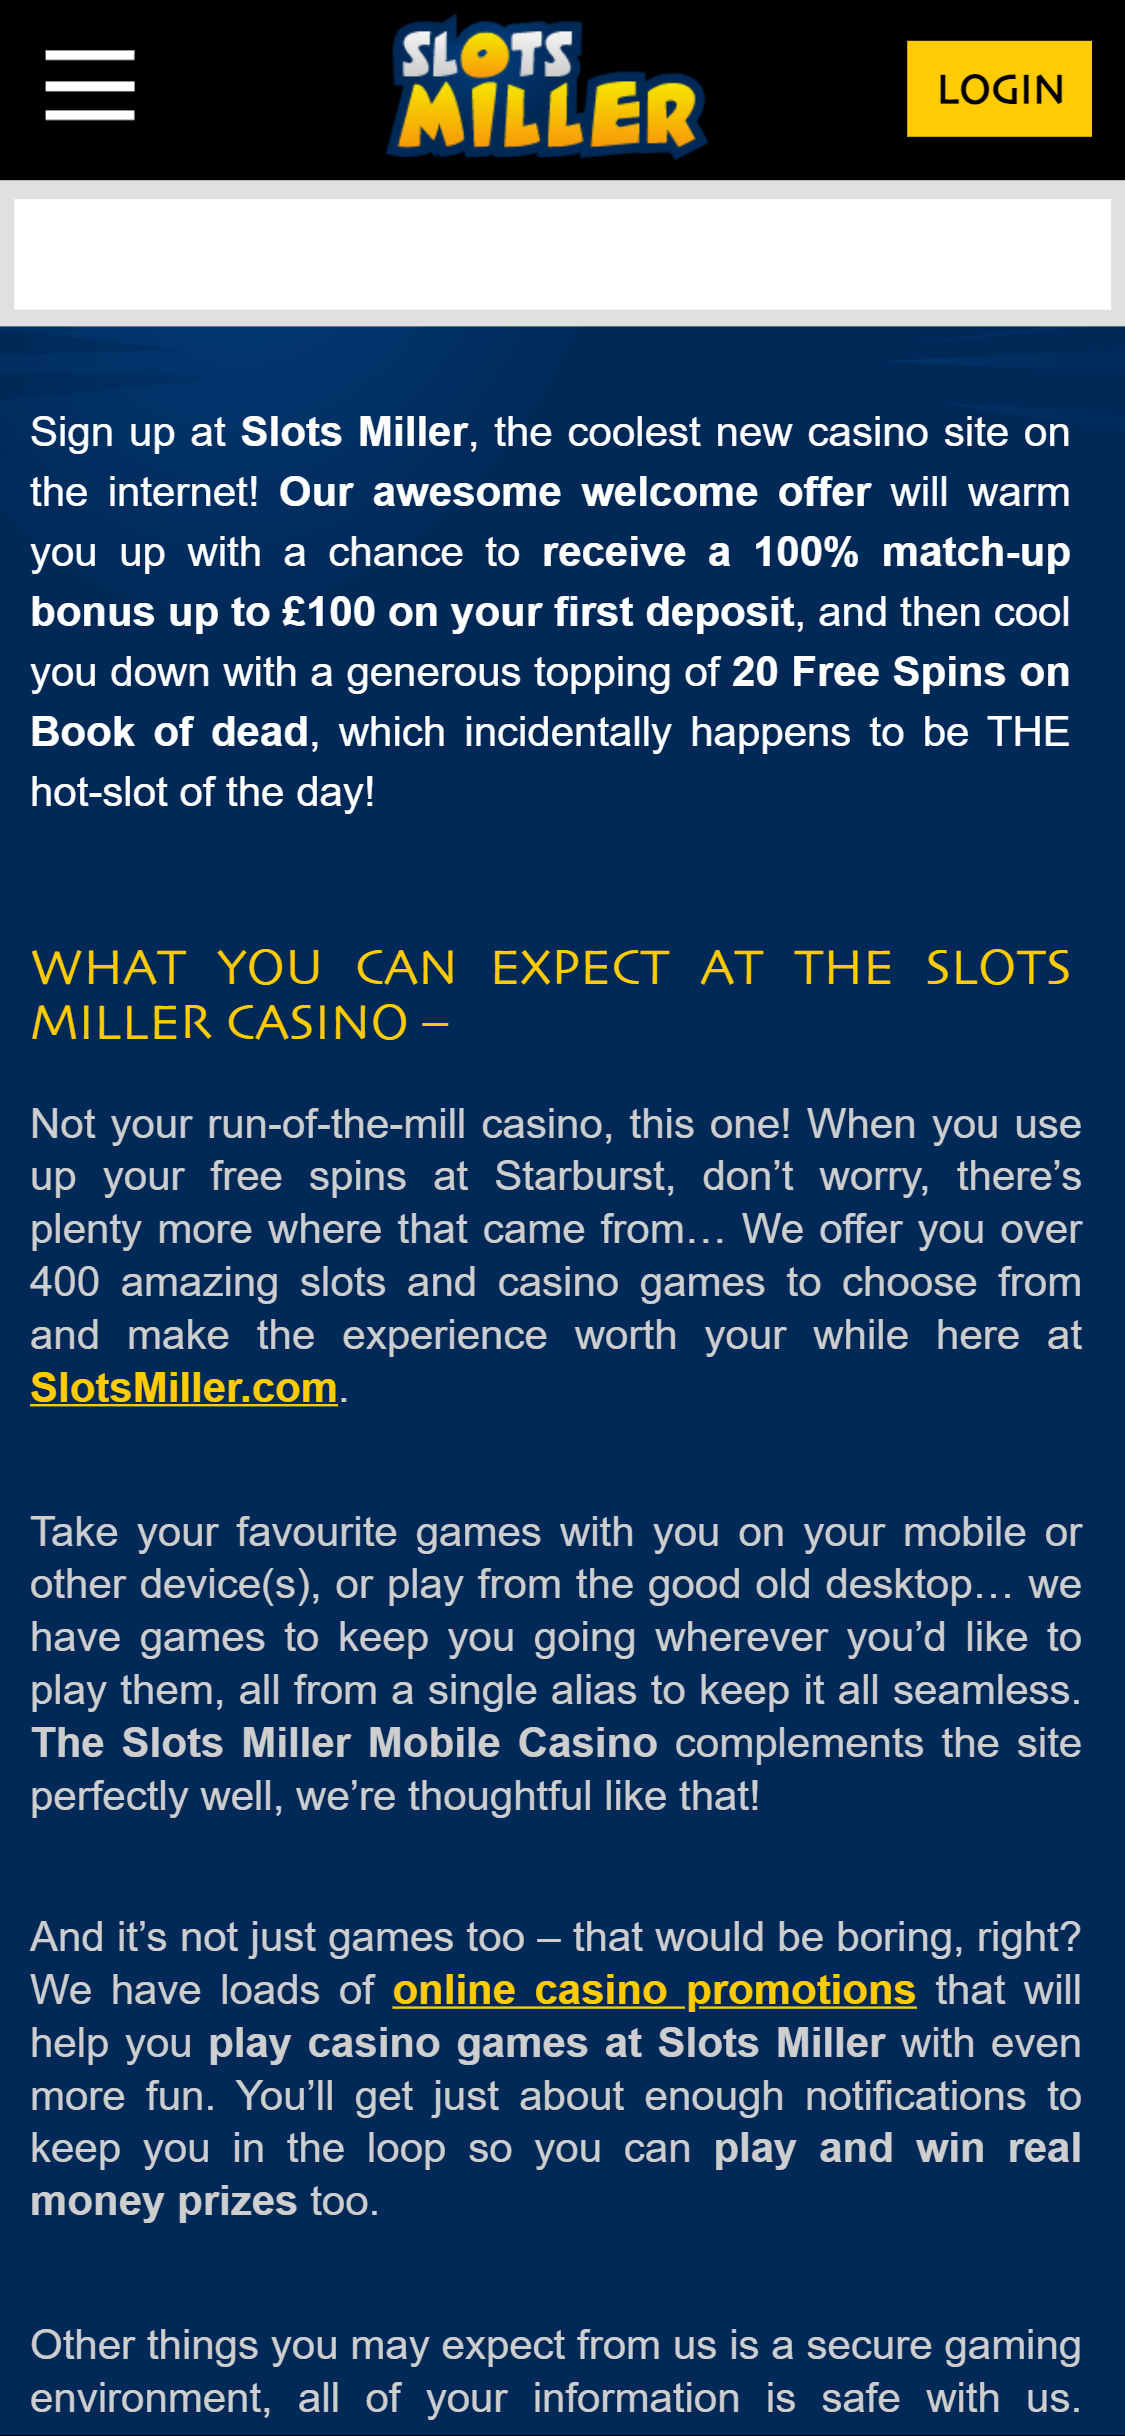 Slots Miller Casino Mobile Payment Methods Review